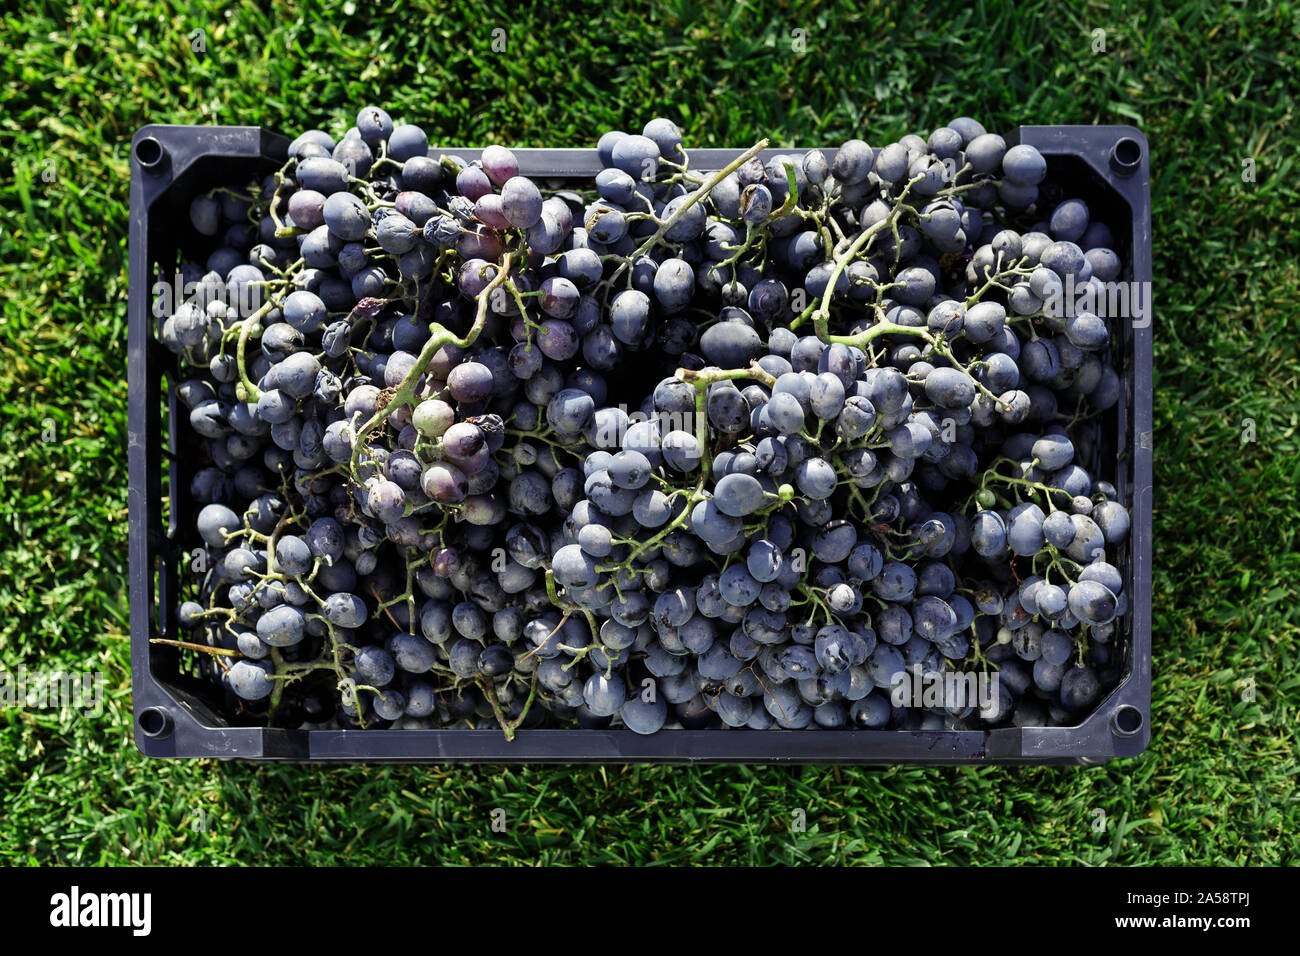 Baskets of Ripe bunches of black grapes outdoors. Autumn grapes harvest in vineyard on grass ready to delivery for wine making. Cabernet Sauvignon Stock Photo